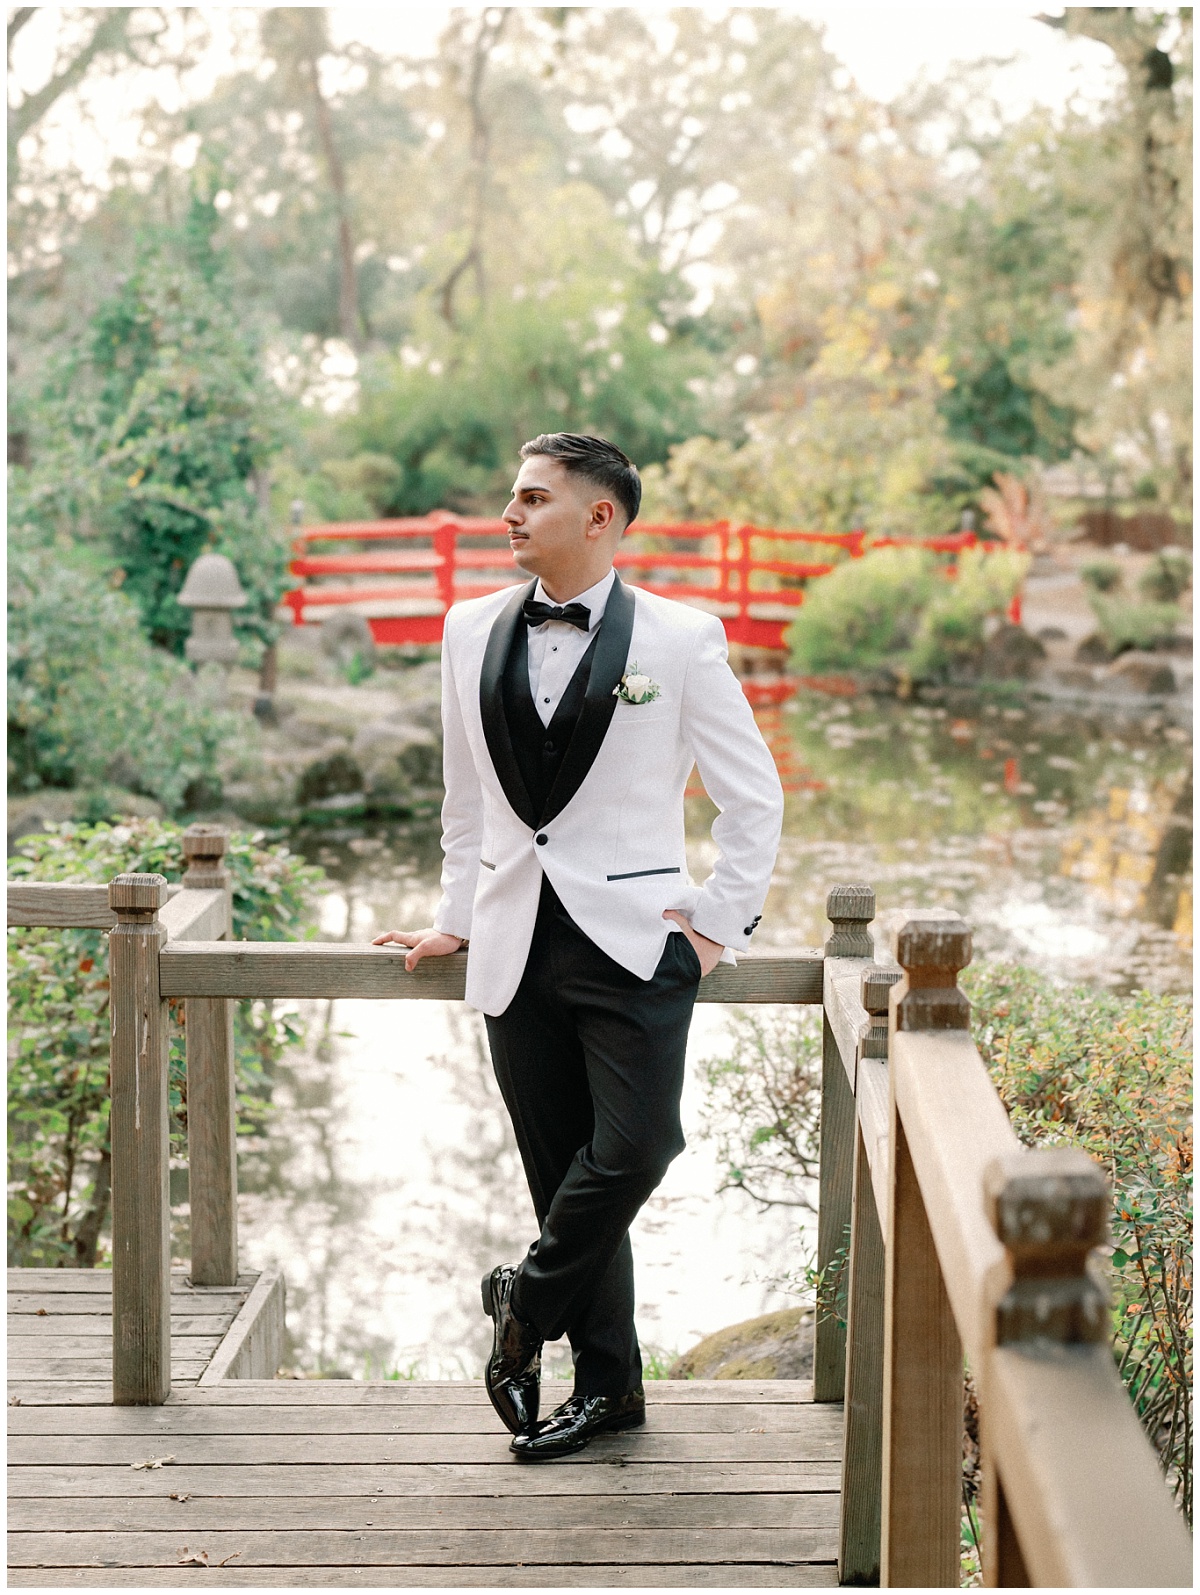 Groom Portraits in the Japanese Garden with the Red Bridge and Koi Pond